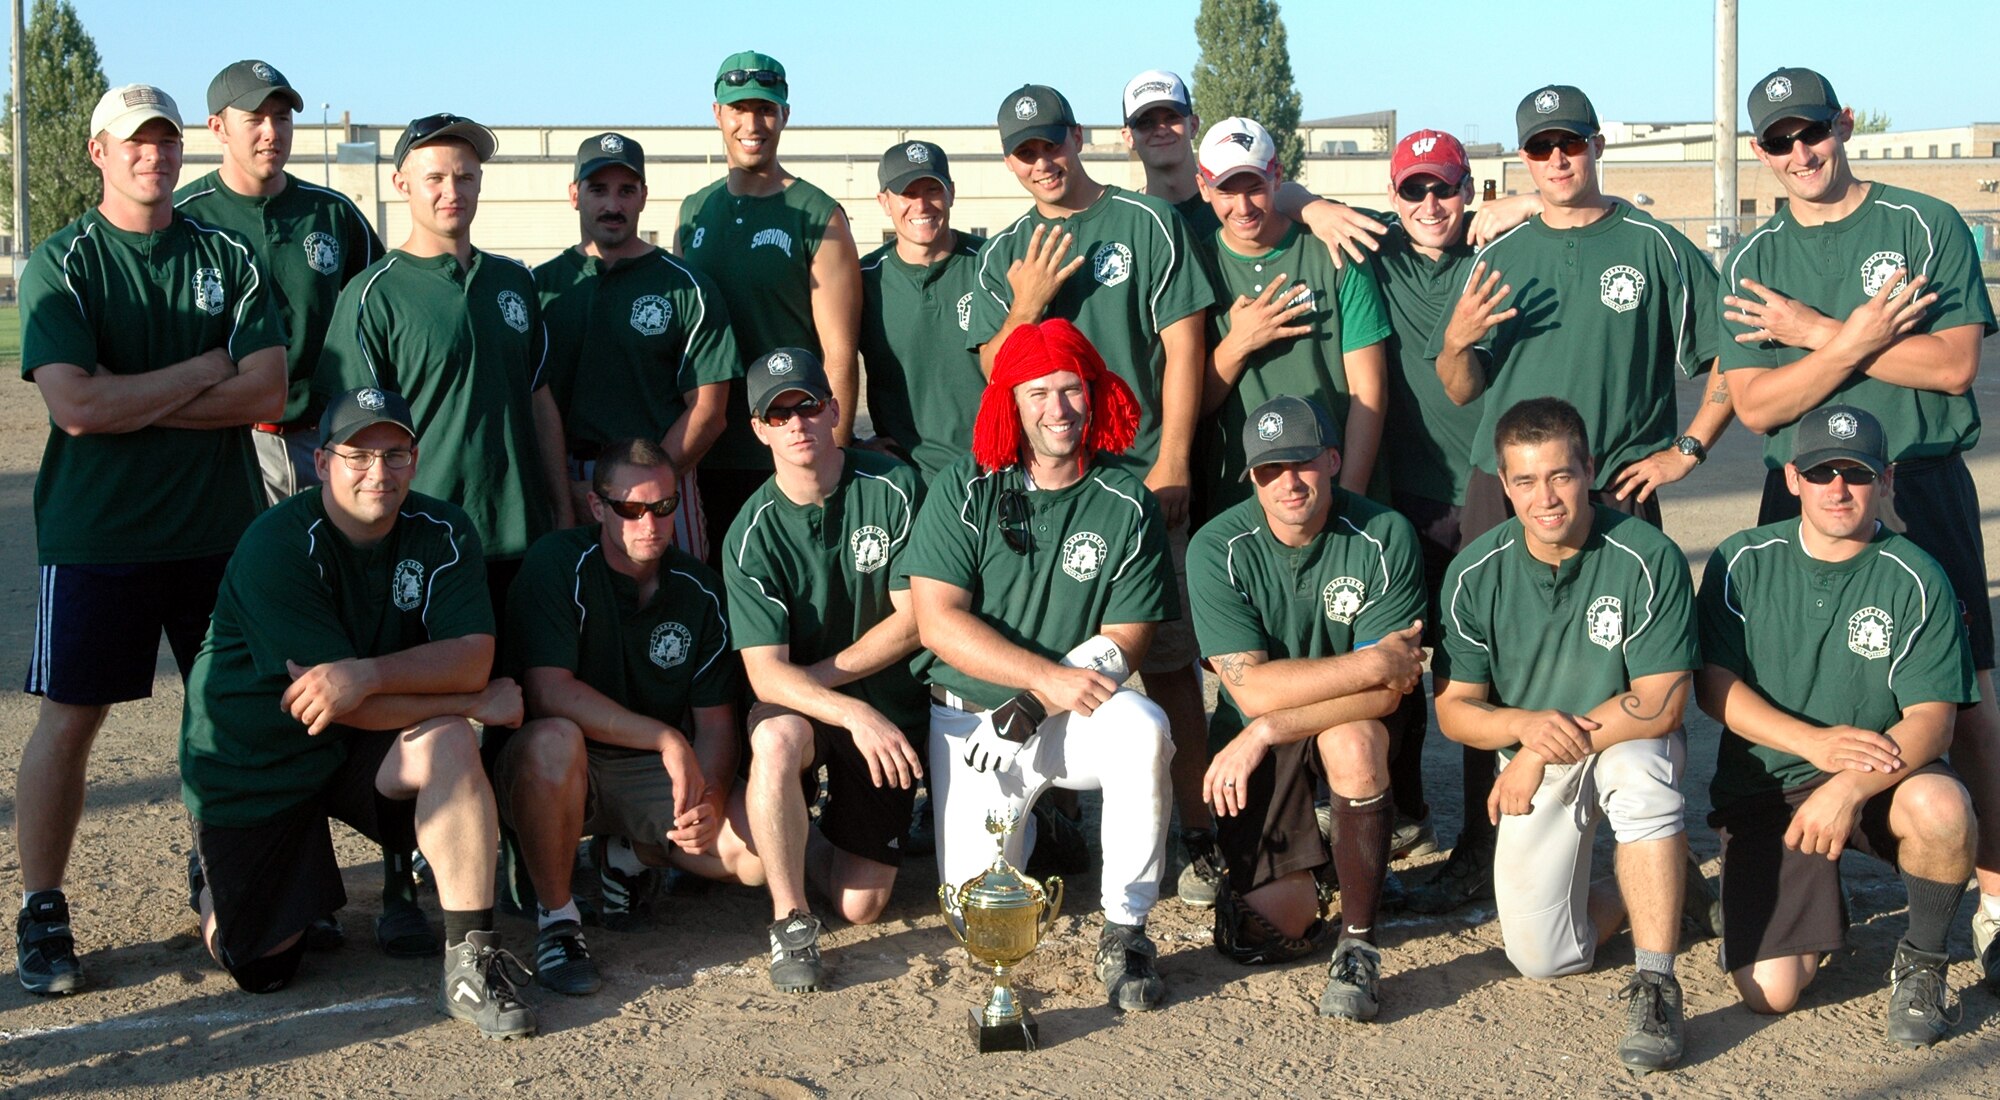 FAIRCHILD AIR FORCE BASE, Wash. -- The 336th Training Group won the 2007 base intramural softball championship here June 27 . The team was led by second year coach Senior Airman Daniel Wiggins, 22nd Training Squadron, and outlasted the 92nd Opertions Group for a 17-12 victory.

(U.S. Air Force Photo / Tech. Sgt. Larry W. Carpenter Jr.)